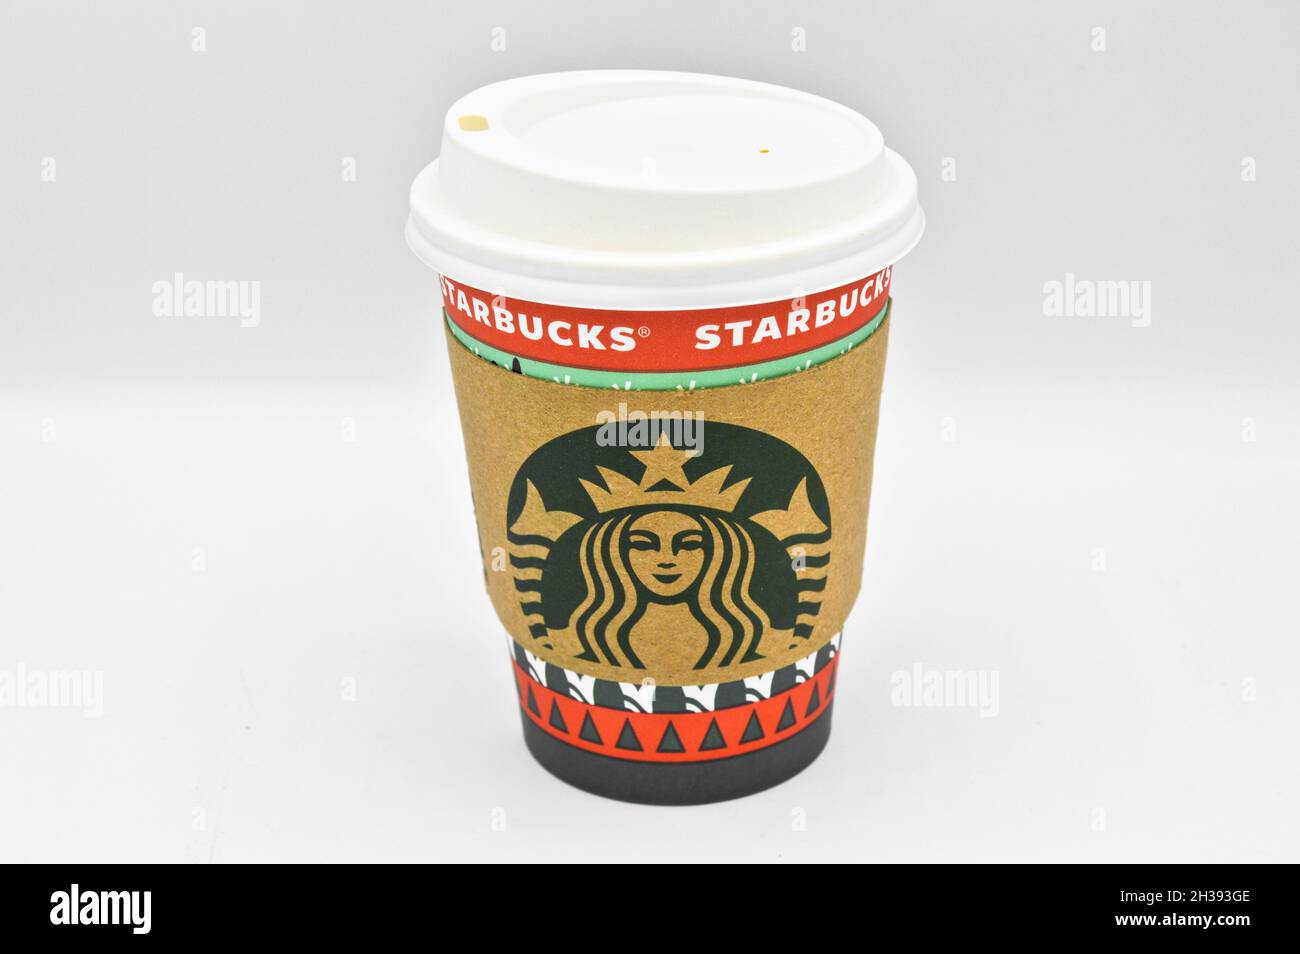 https://c8.alamy.com/comp/2H393GE/christmas-concept-of-starbucks-paper-cup-isolated-on-white-background-istanbul-turkey-27-december-2020-2H393GE.jpg